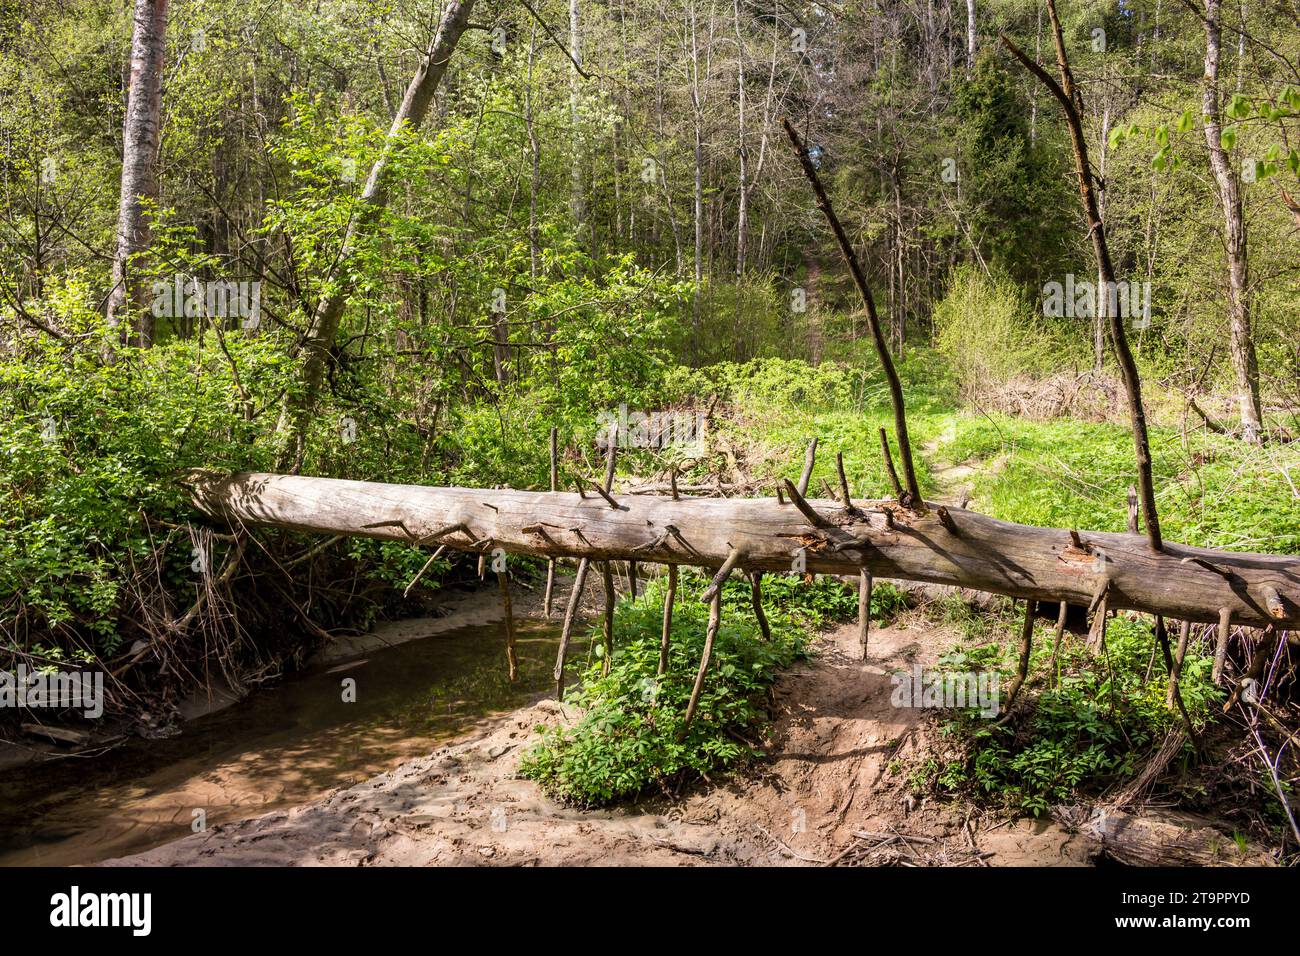 Fallen dry tree blocking a ford across a stream Stock Photo